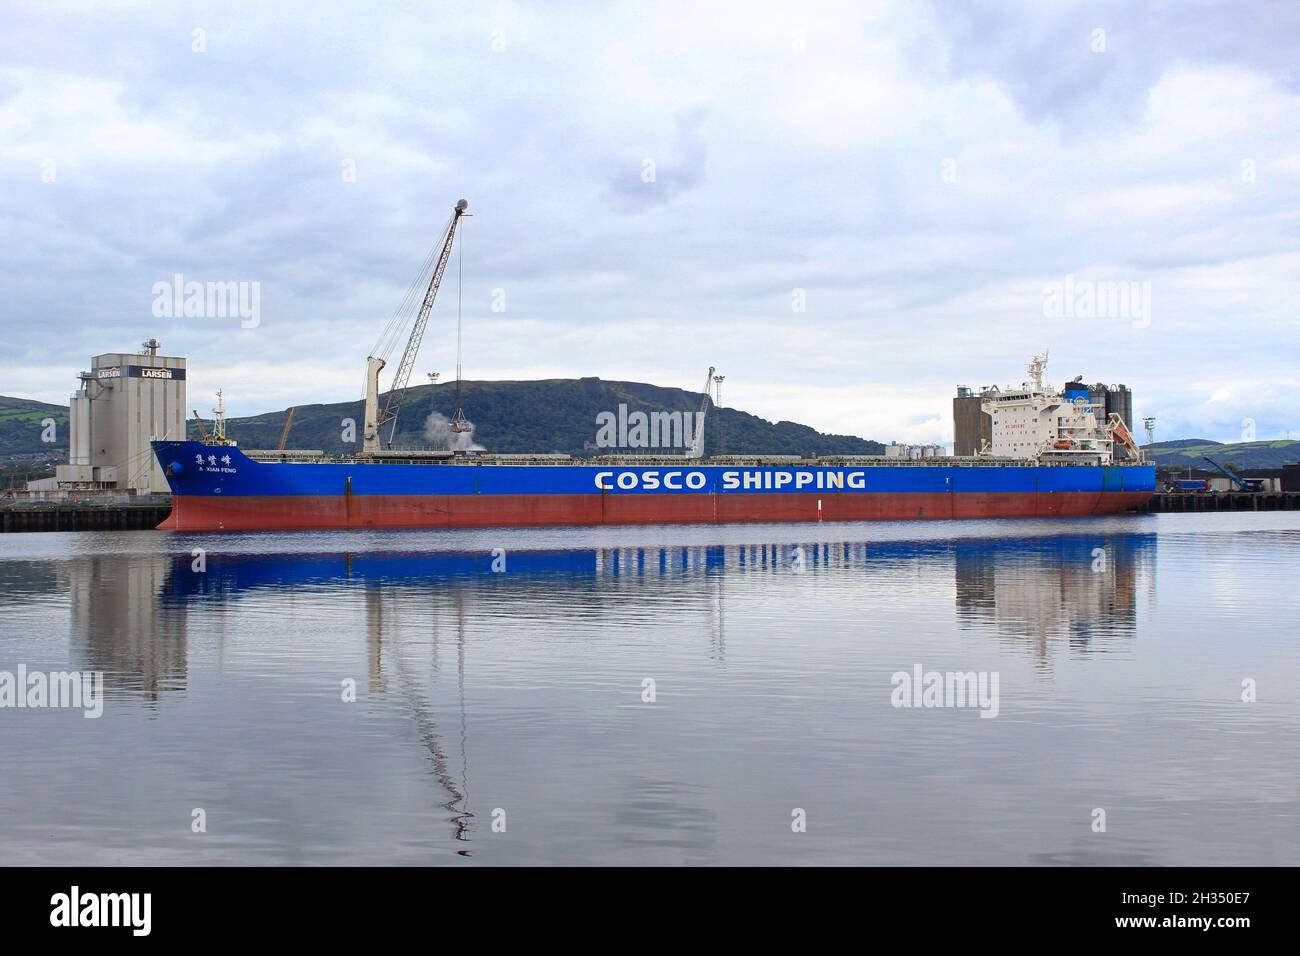 COSCO Shipping Vessel in Harland And Wolff Docks, Belfast Stock Photo